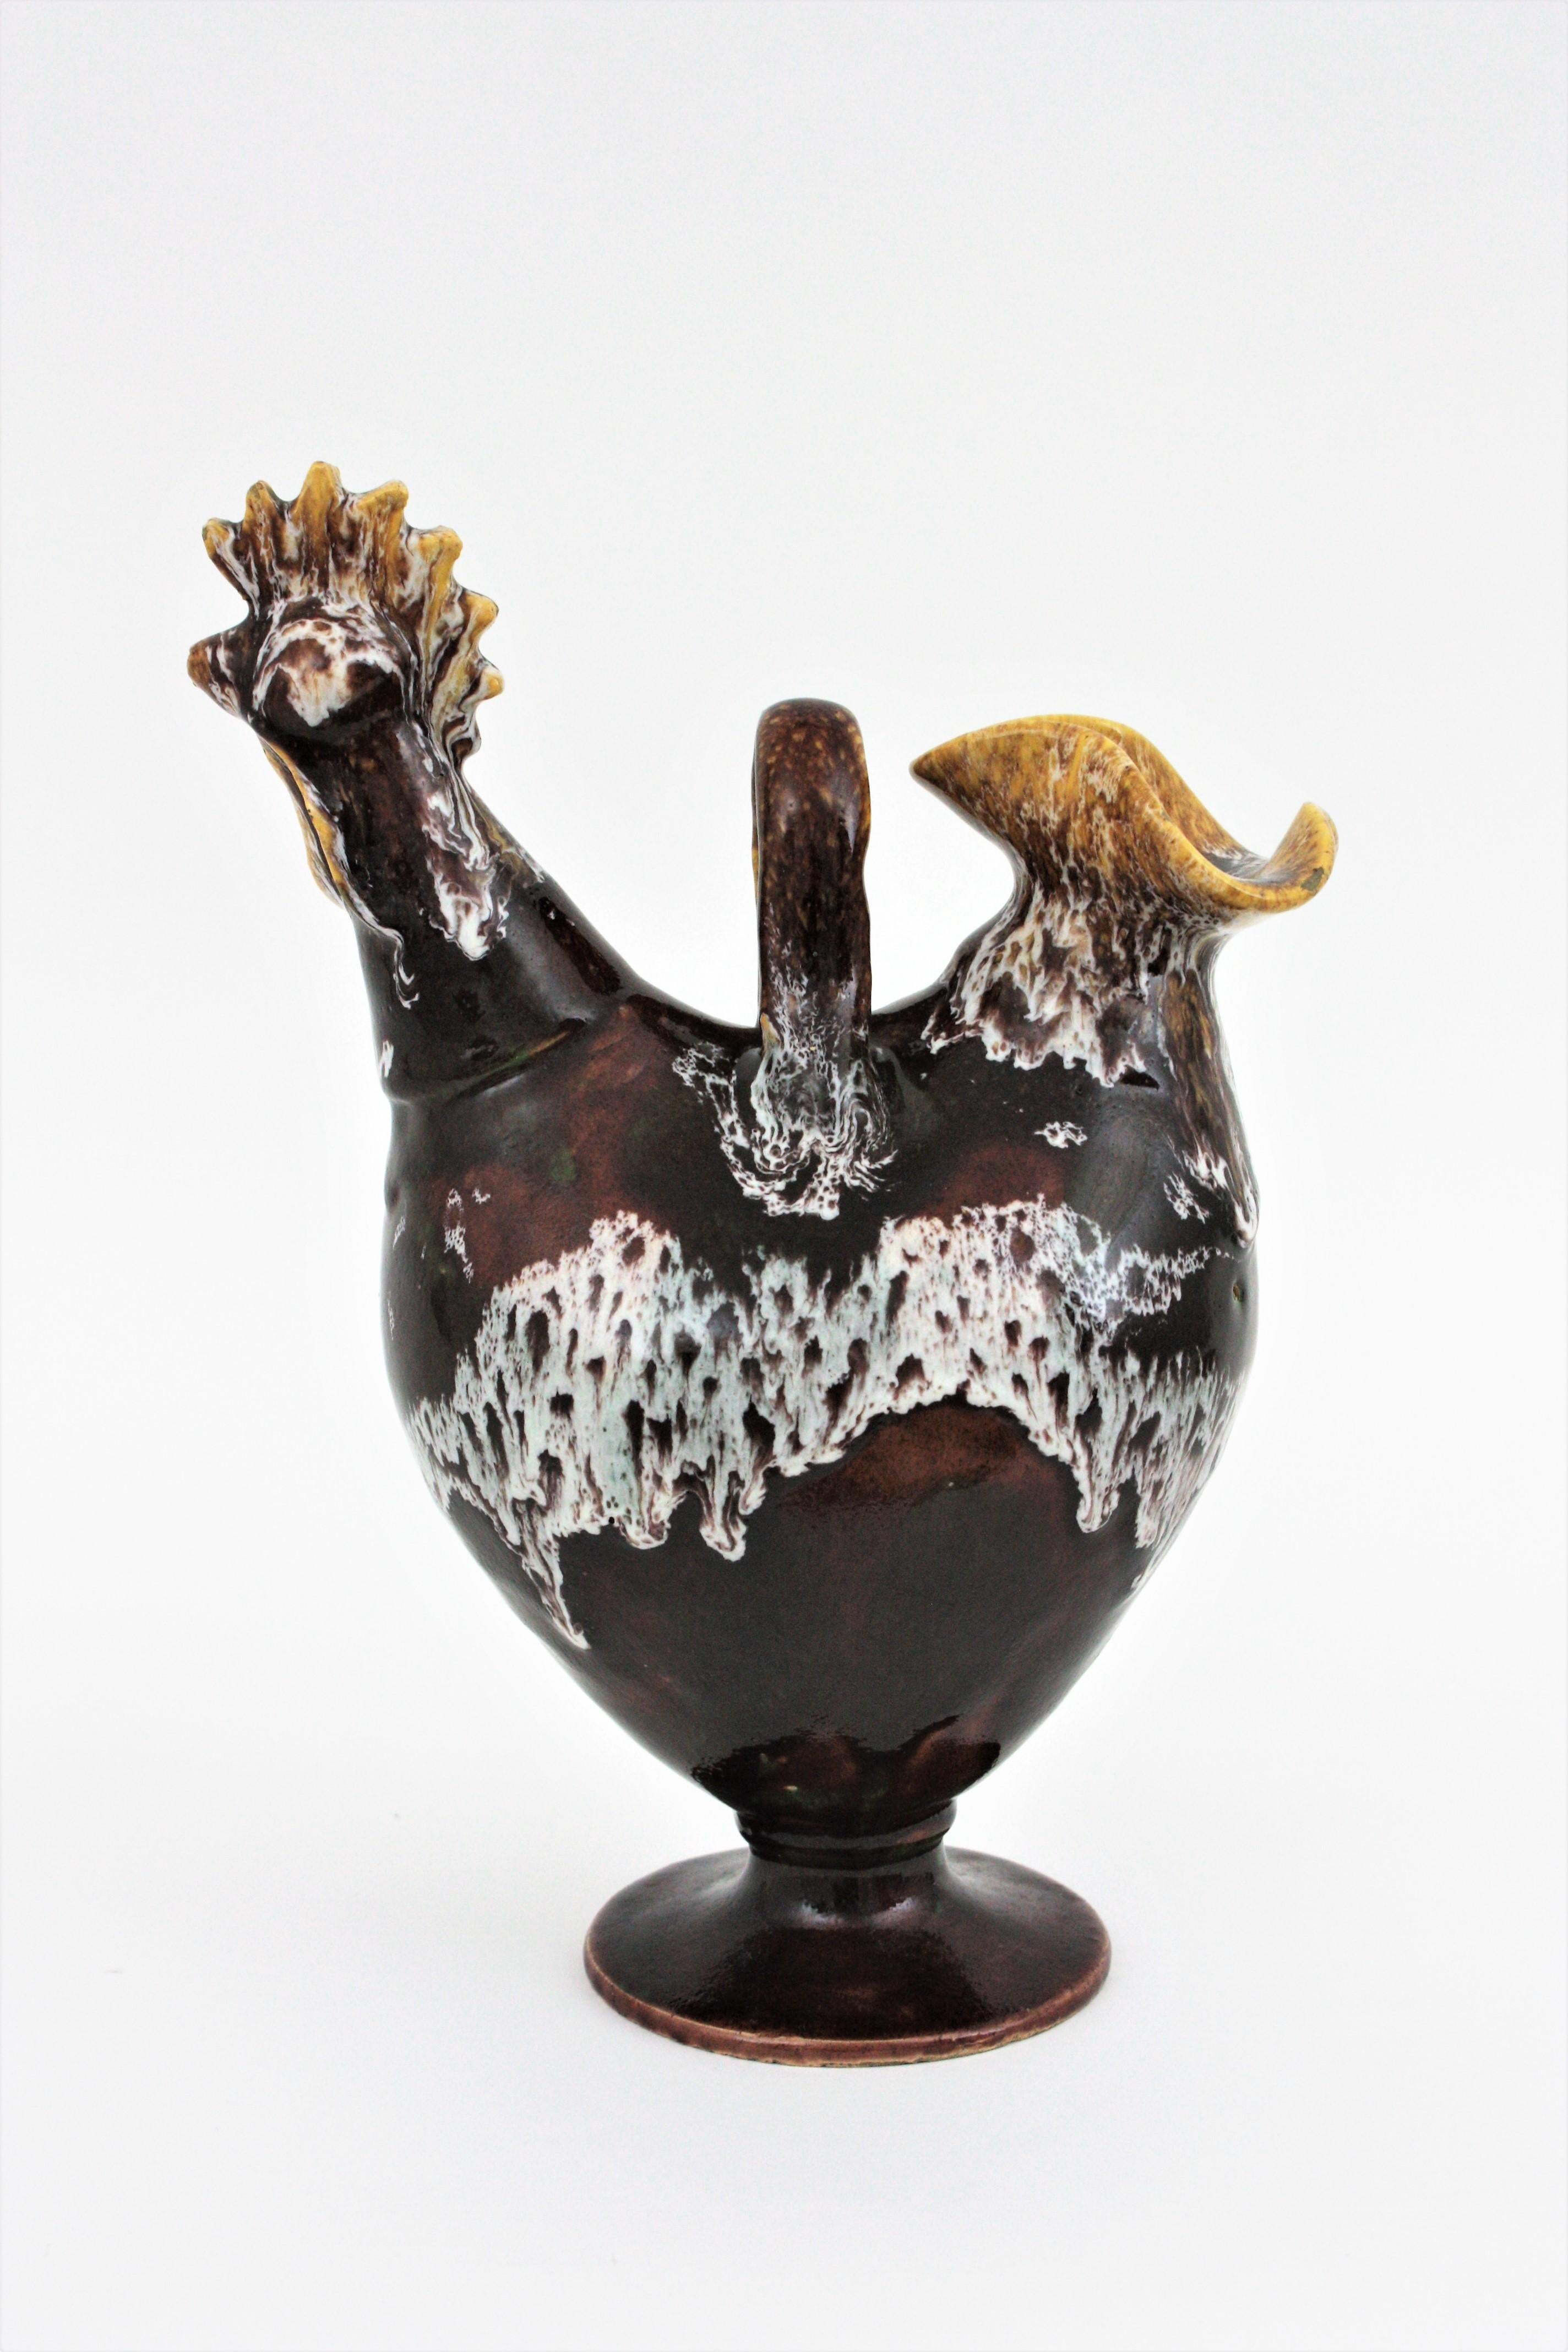 Spanish Rooster Shaped Pitcher in Brown Glazed Ceramic, 1960s For Sale 4